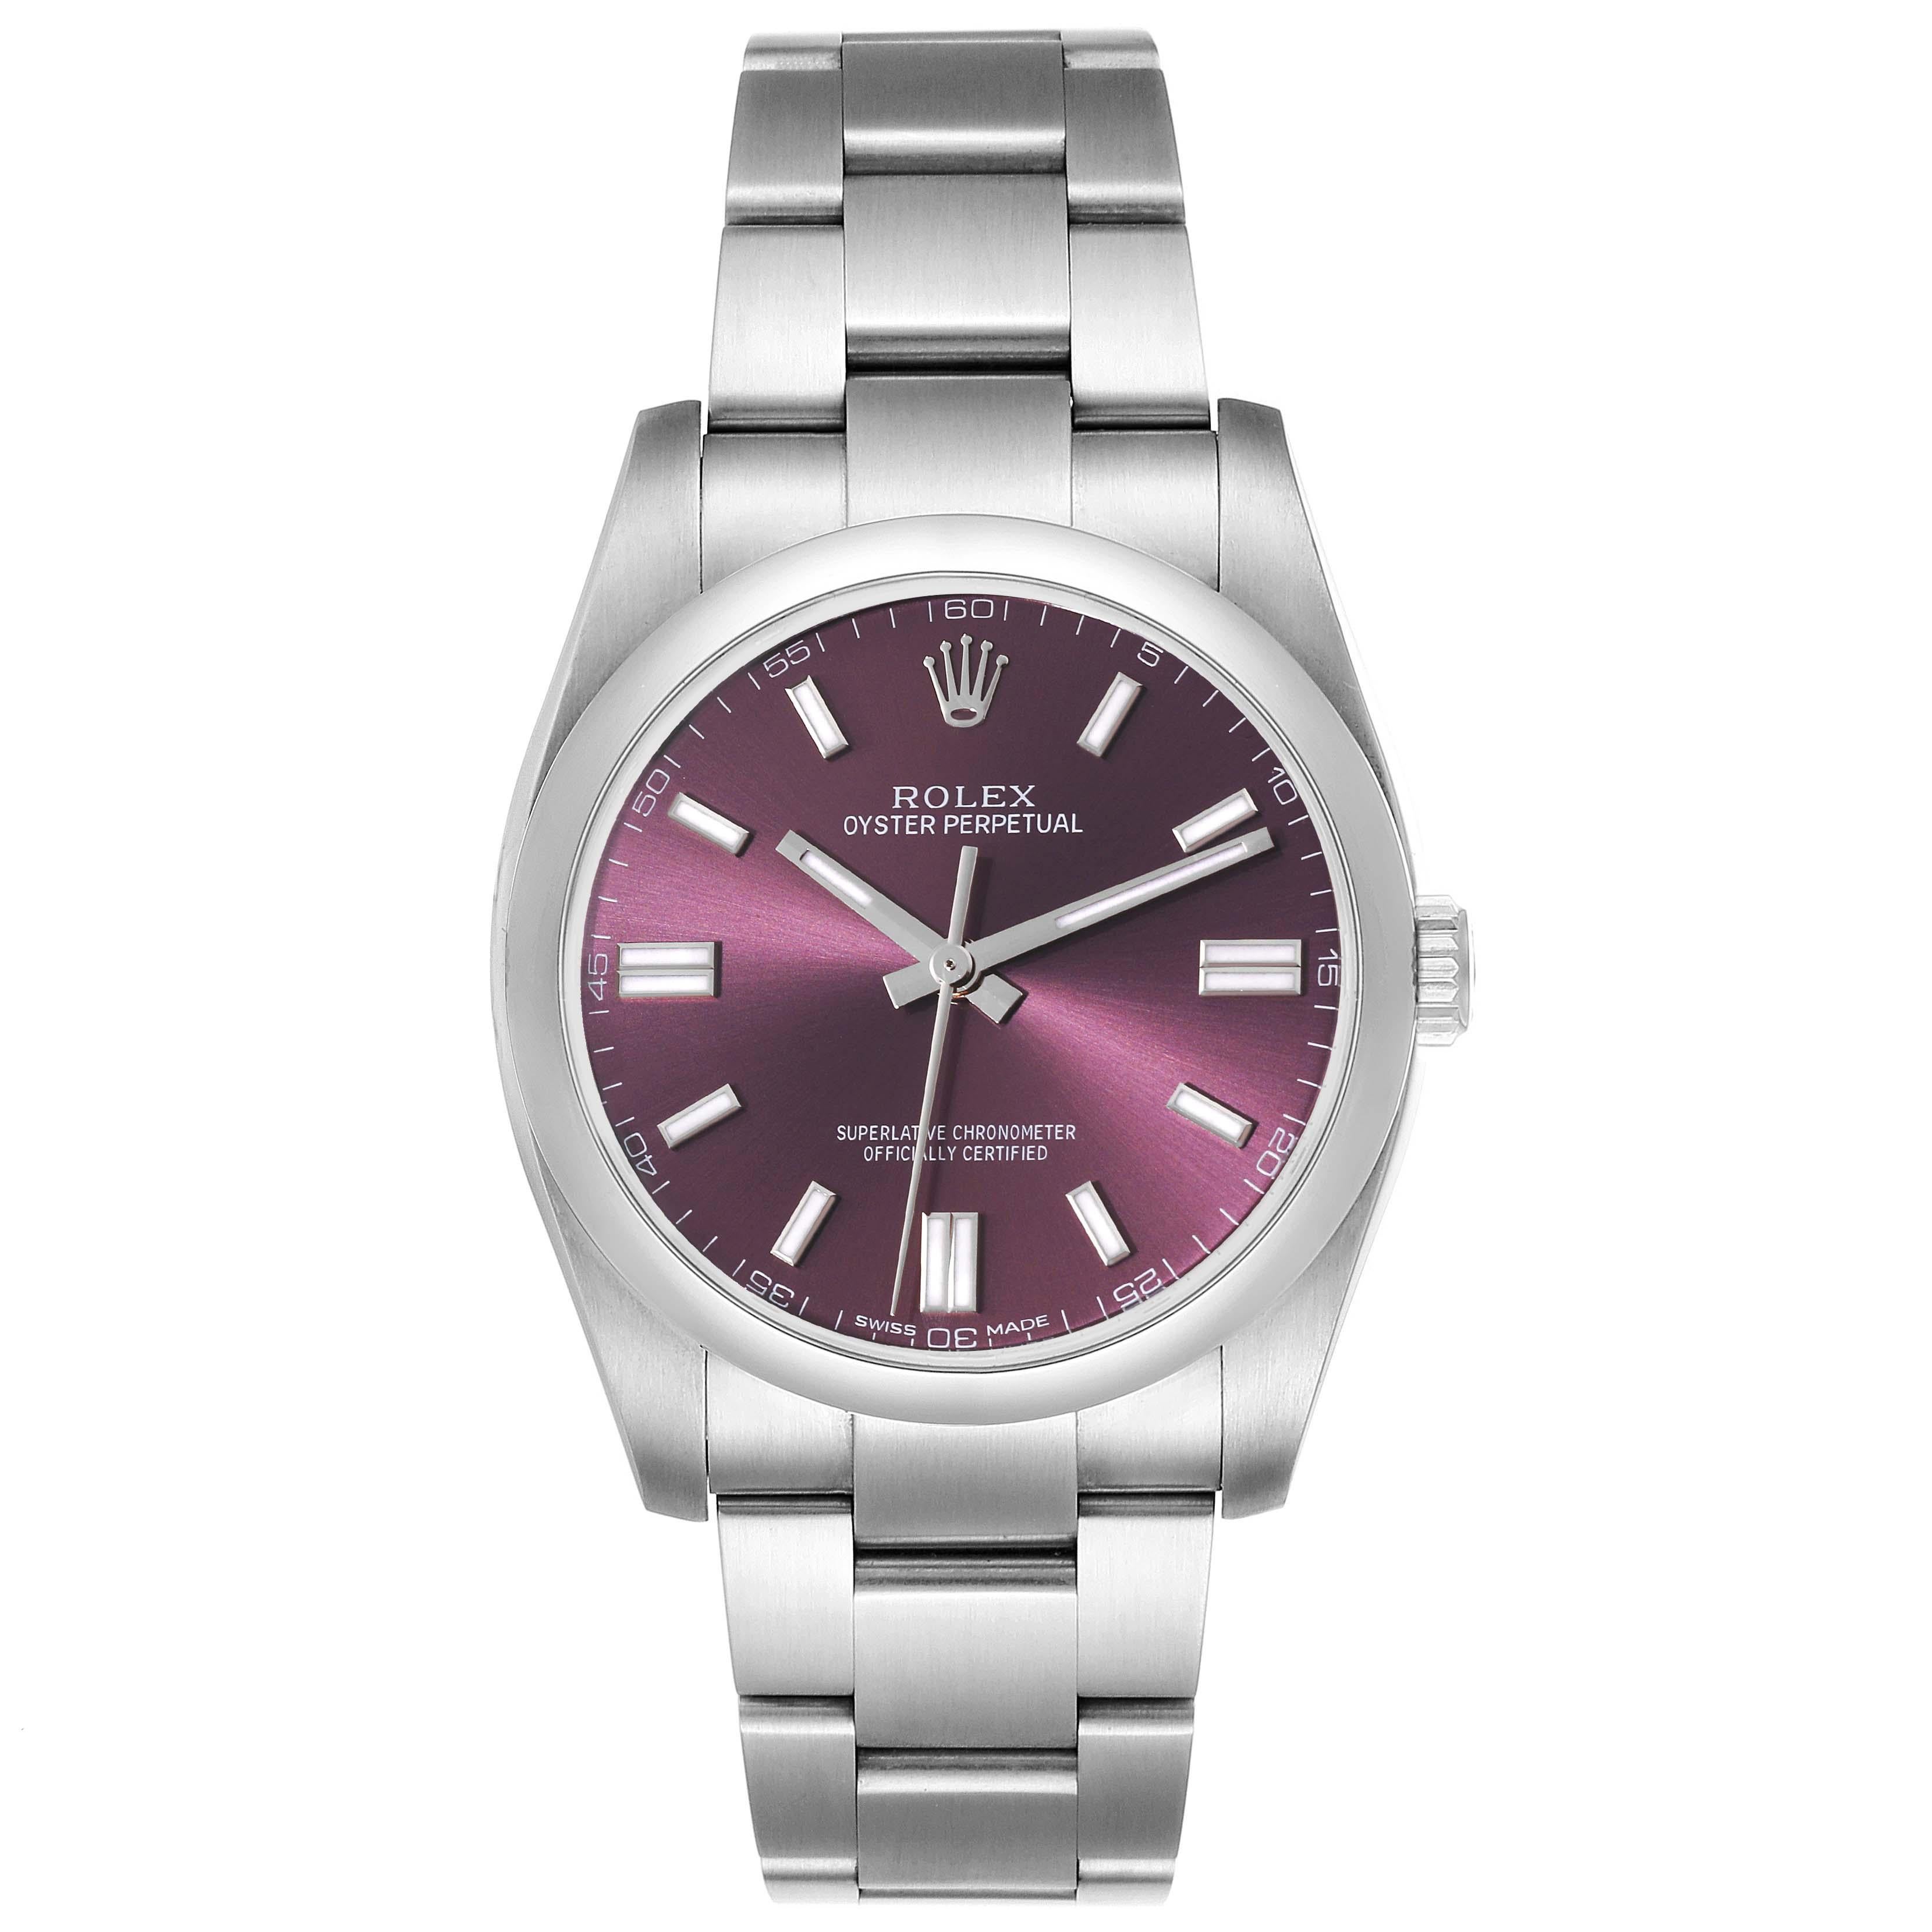 Rolex Oyster Perpetual 36 Red Grape Dial Steel Mens Watch 116000. Officially certified chronometer self-winding movement. Stainless steel case 36.0 mm in diameter. Rolex logo on a crown. Stainless steel smooth domed bezel. Scratch resistant sapphire